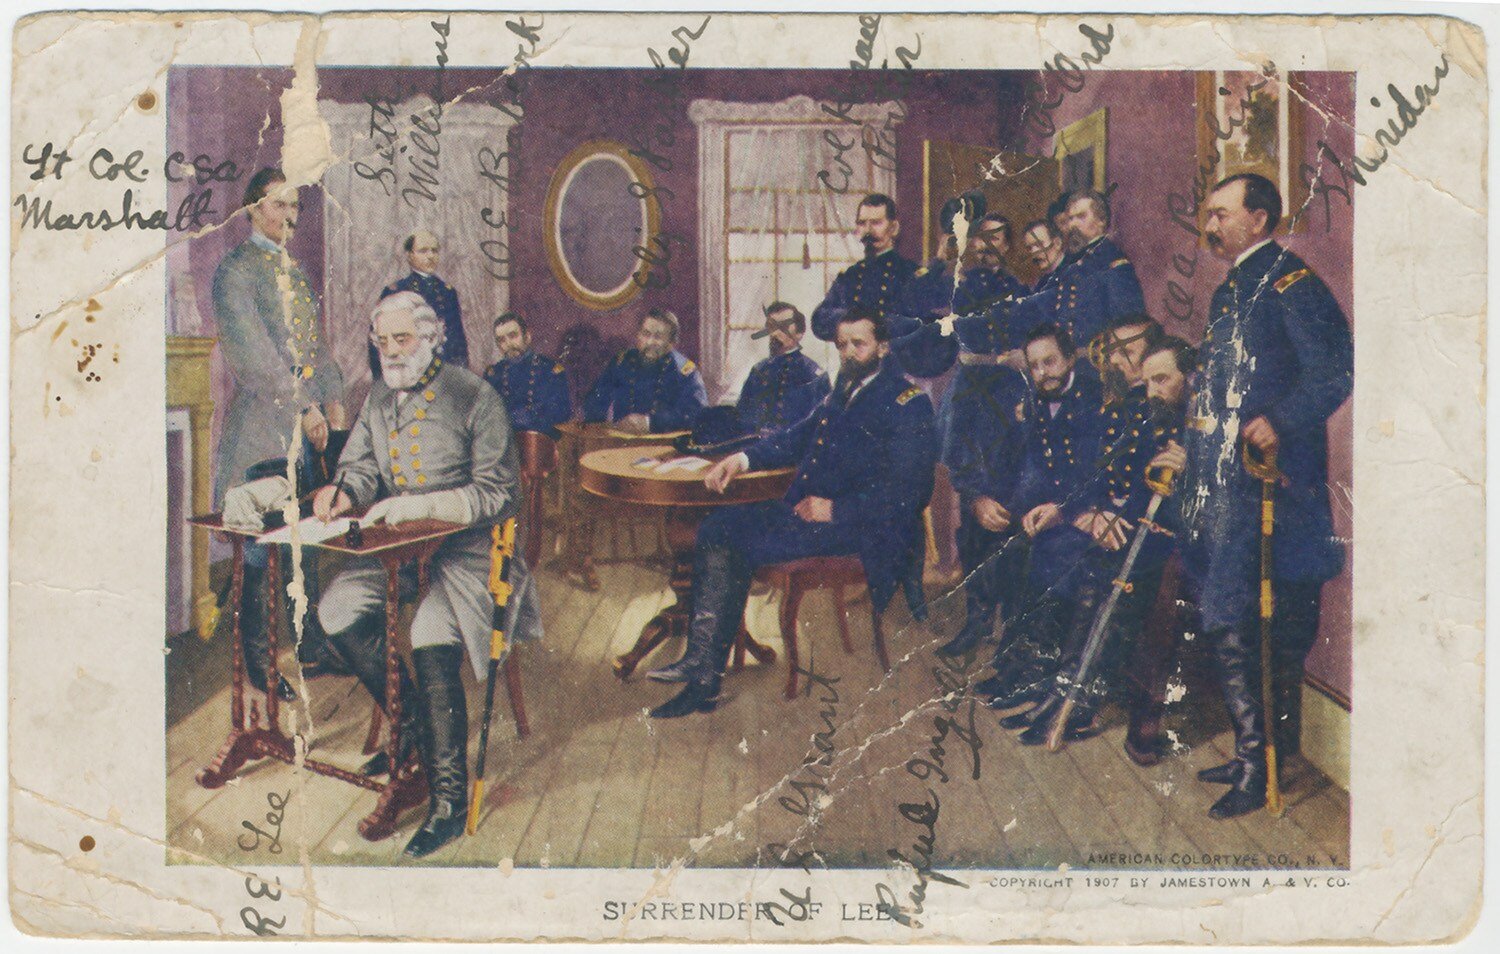 Picturing Union Victory – Early Images of the Surrender at Appomattox